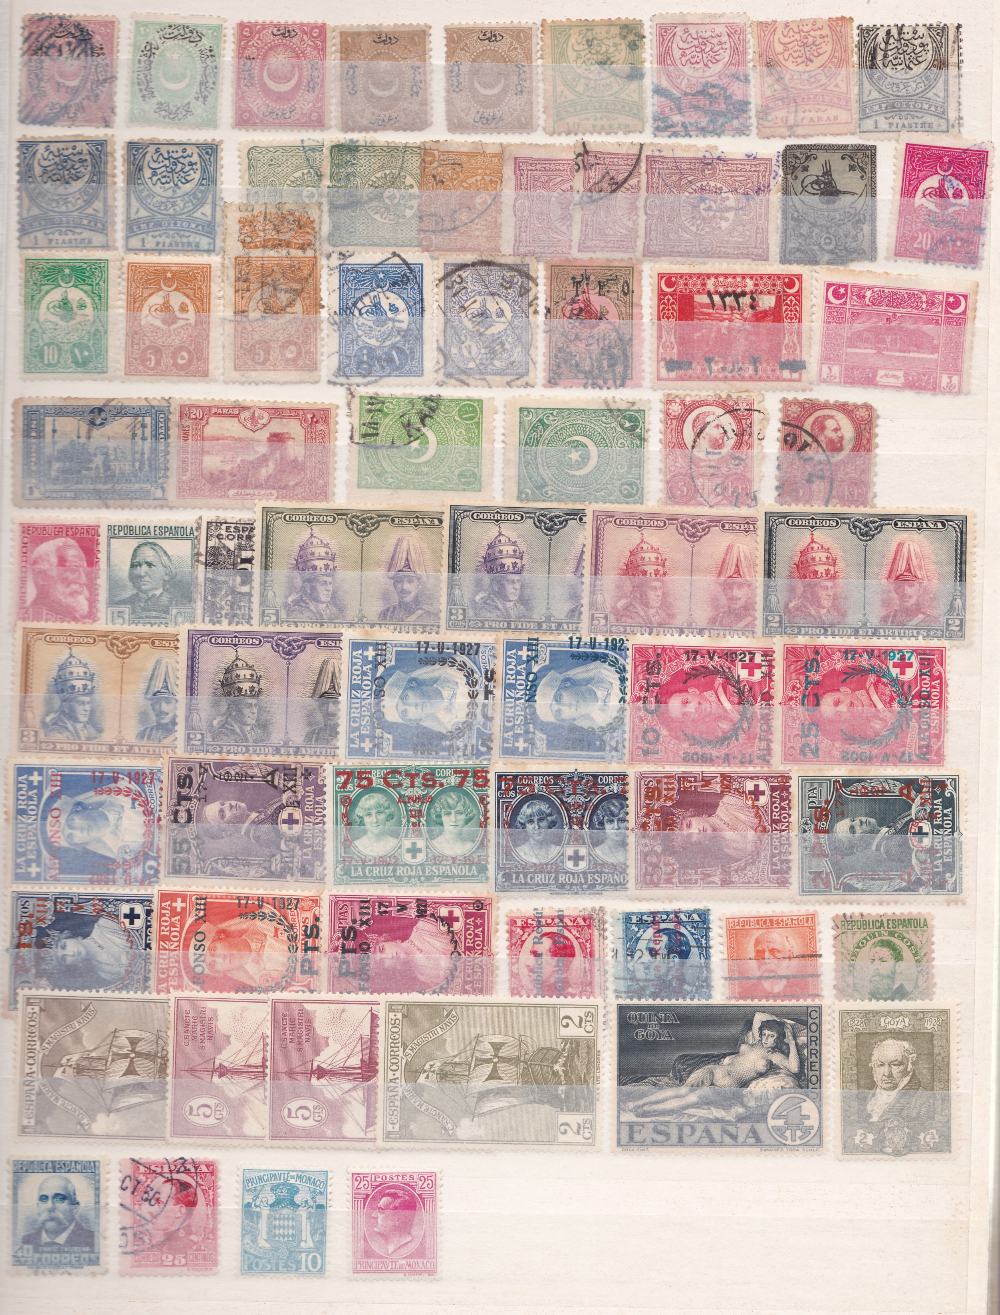 STAMPS : World accumulation in stock-book with a number of useful French Colonies issues noted & - Image 3 of 4